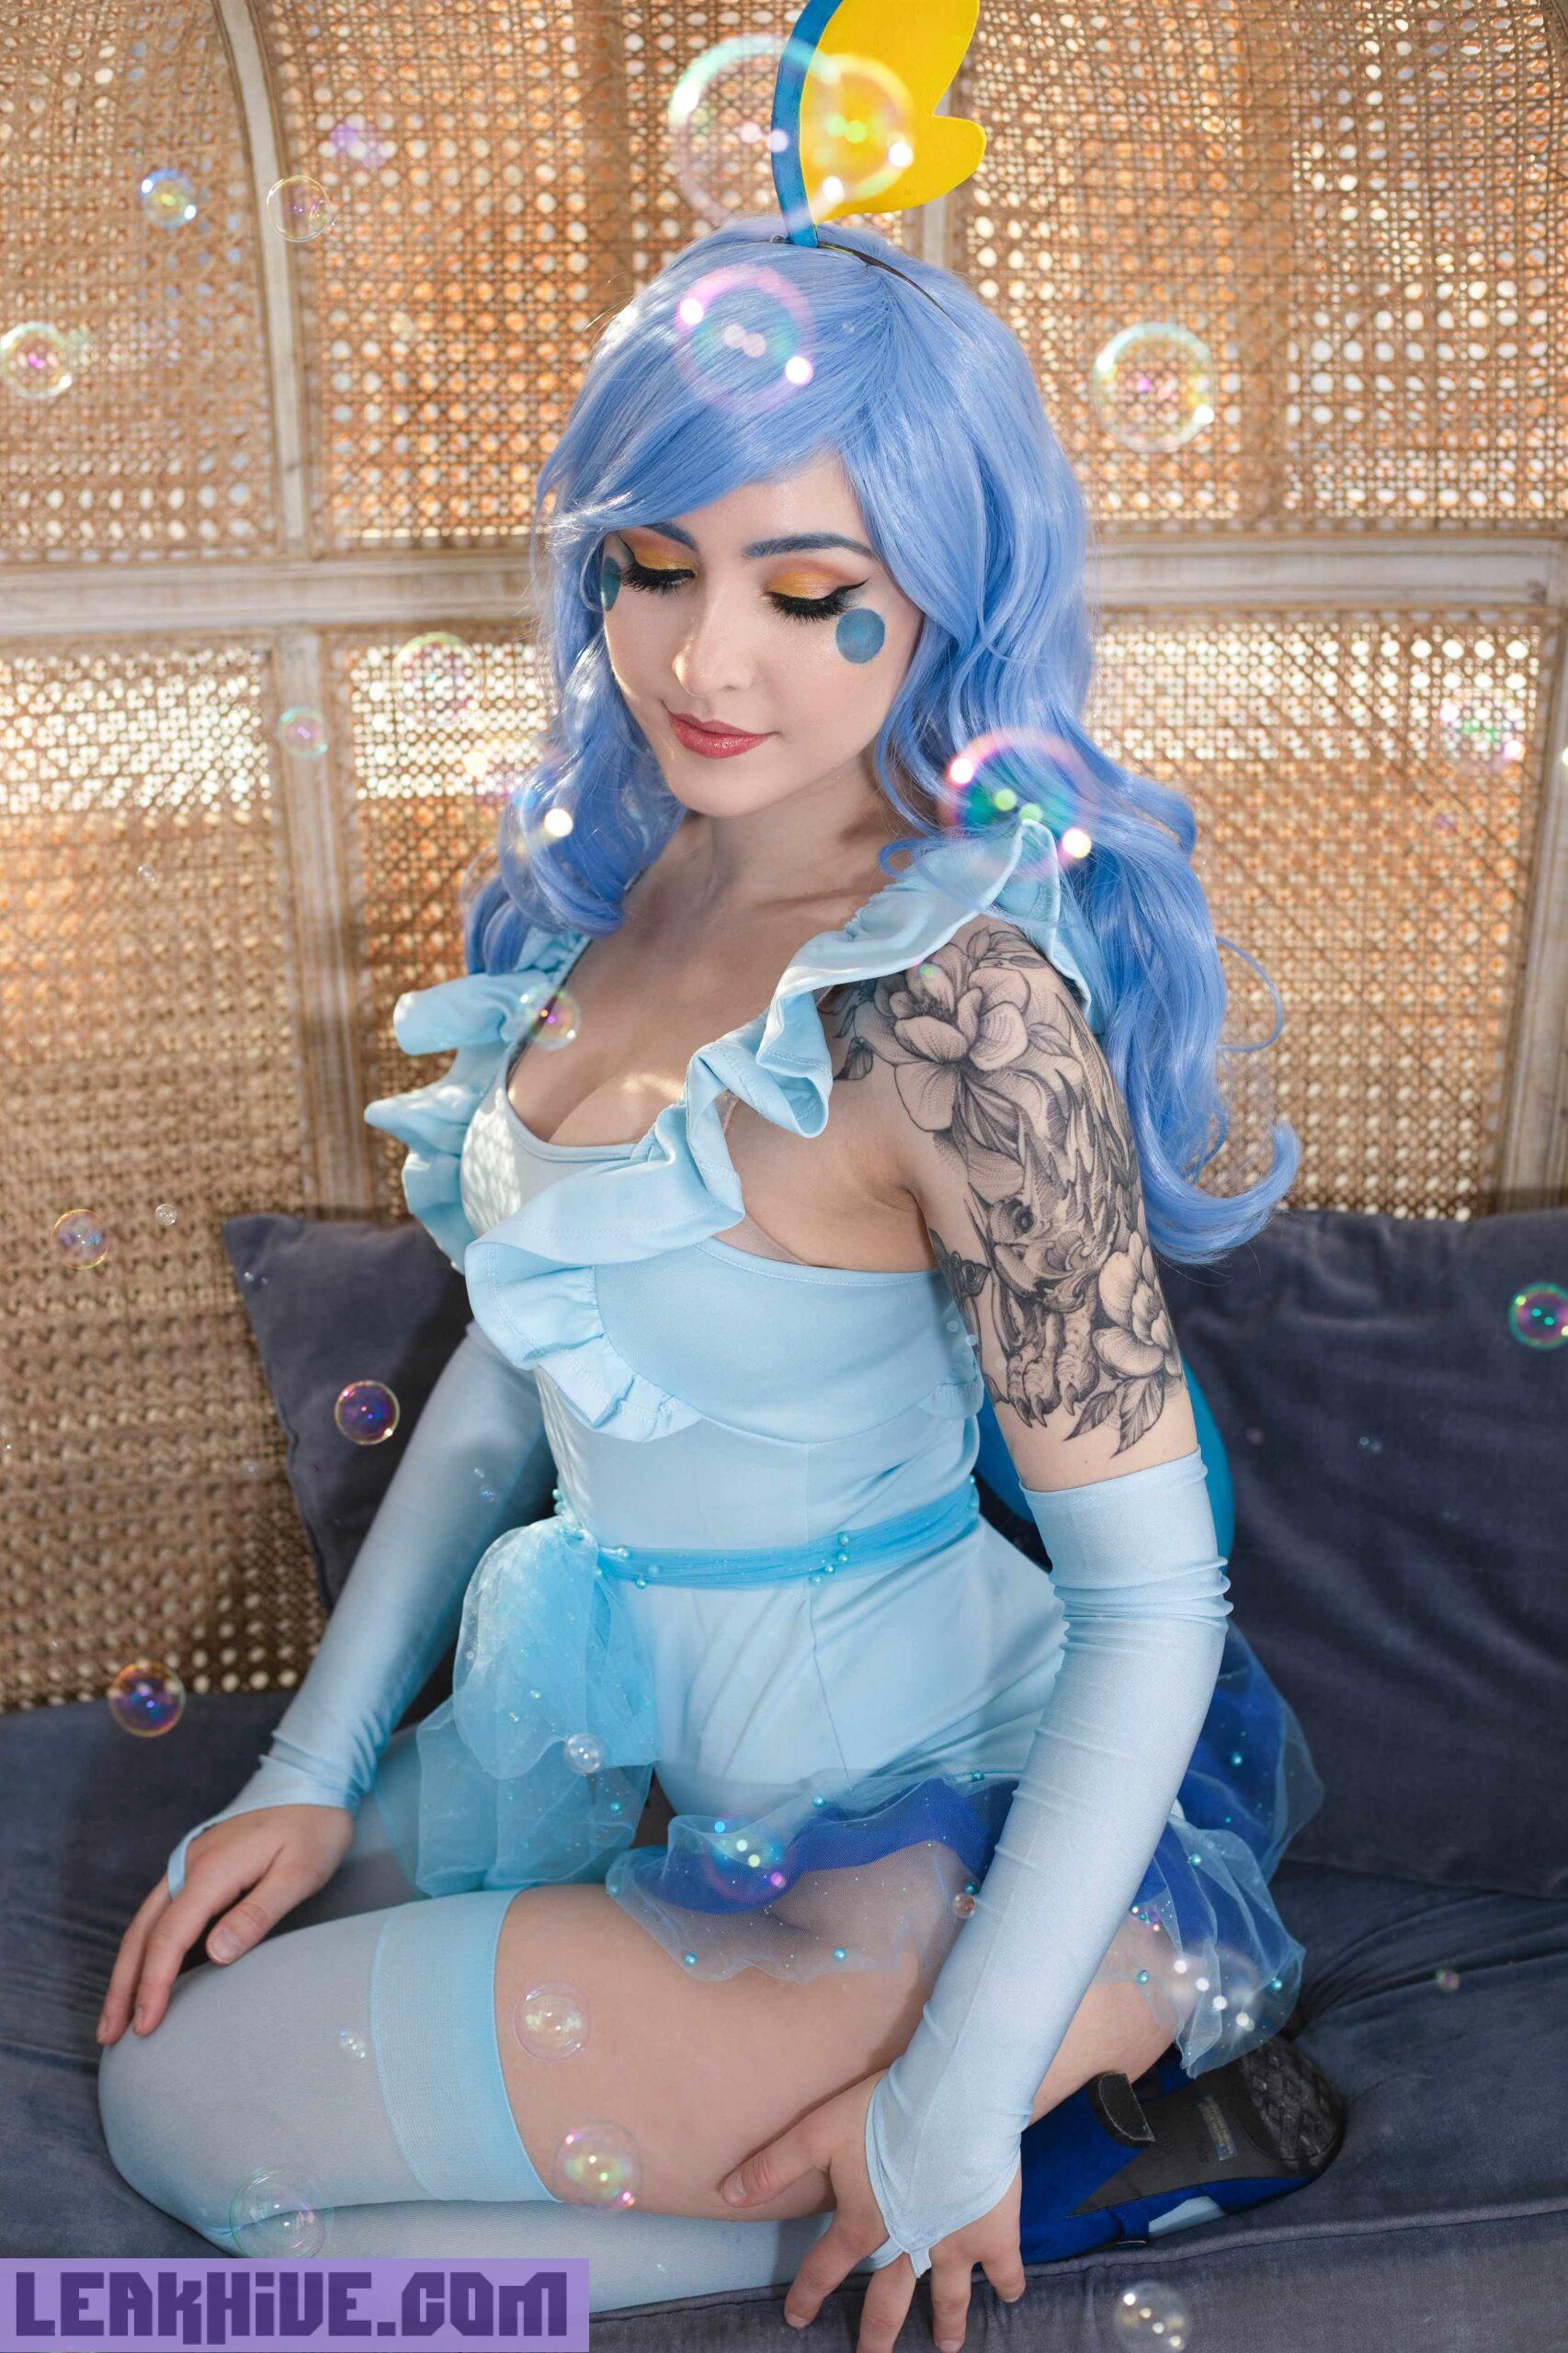 1649996407 671 Luxlo Cosplay Sobble 20 scaled